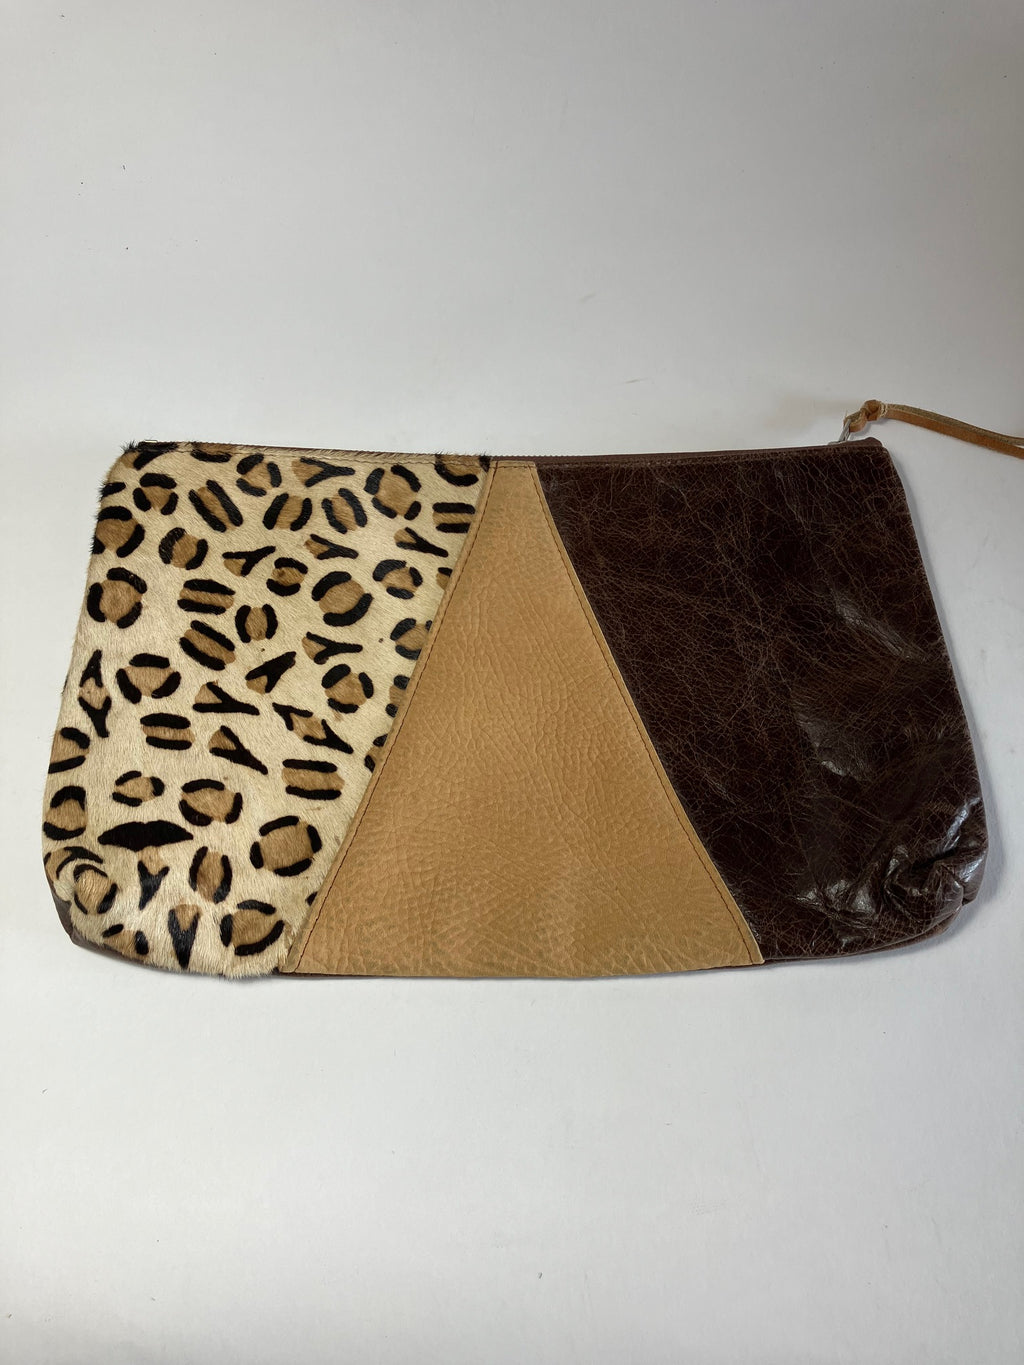 ONE OF A KIND - SAMPLE Leather clutch bag chocolate and camel brown and leopard leather